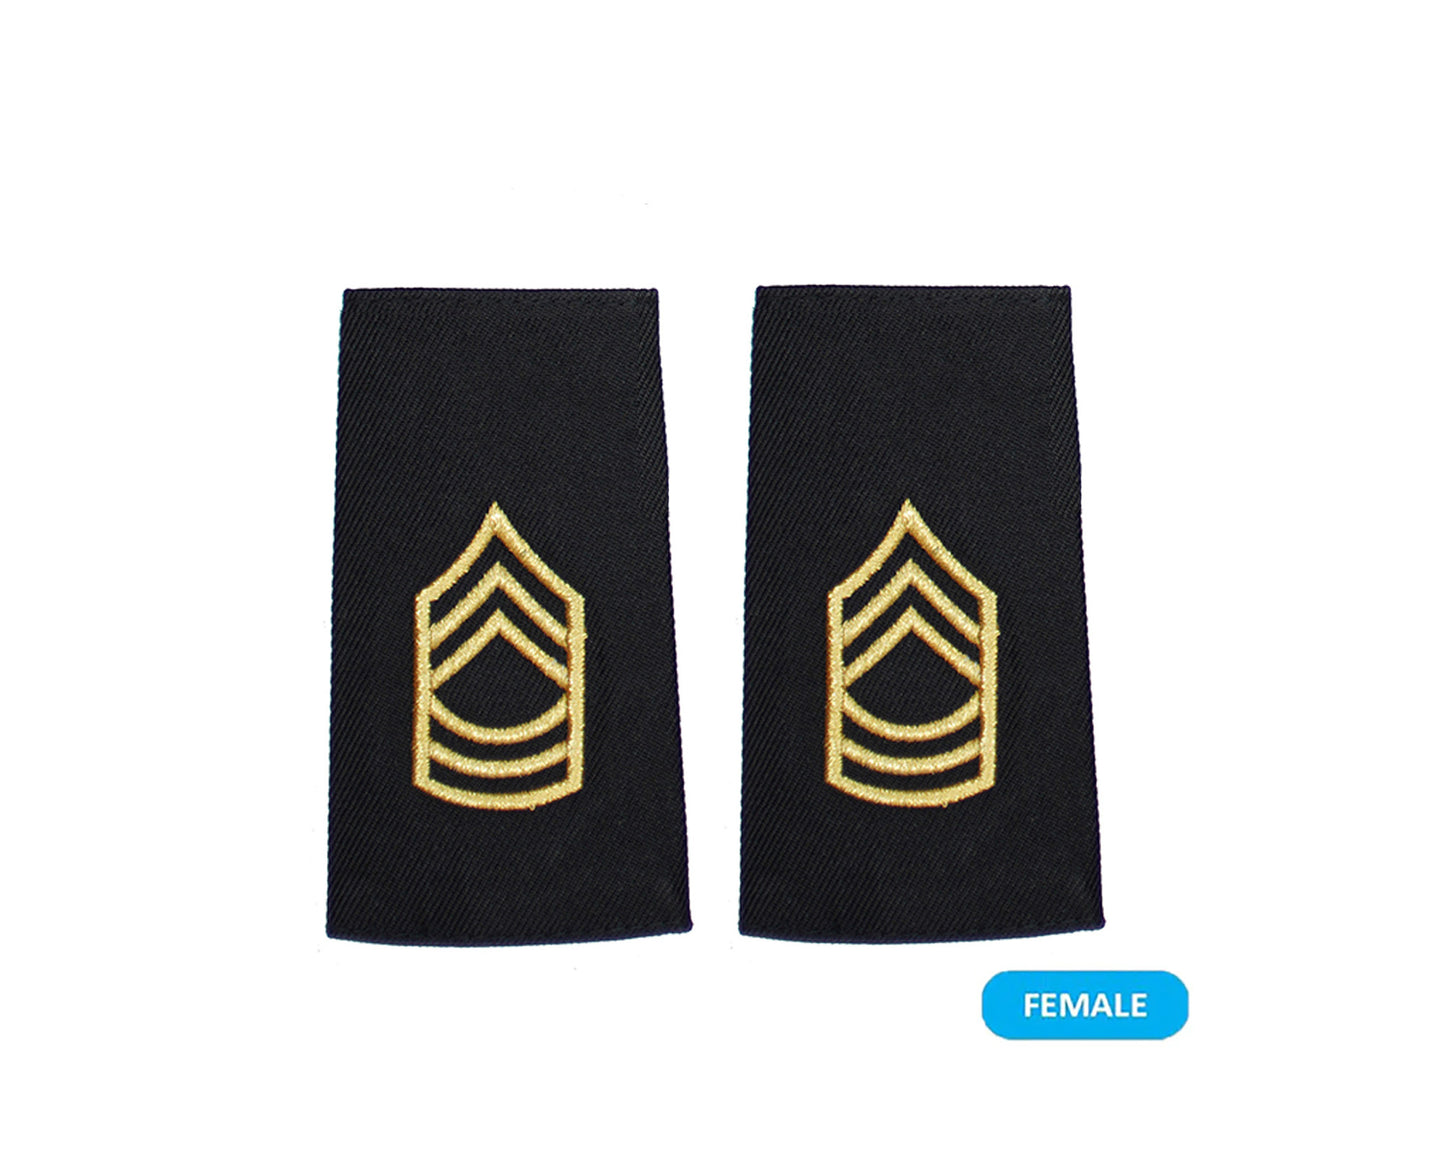 US Army E8 Master Sergeant Shoulder Marks - Small/Female